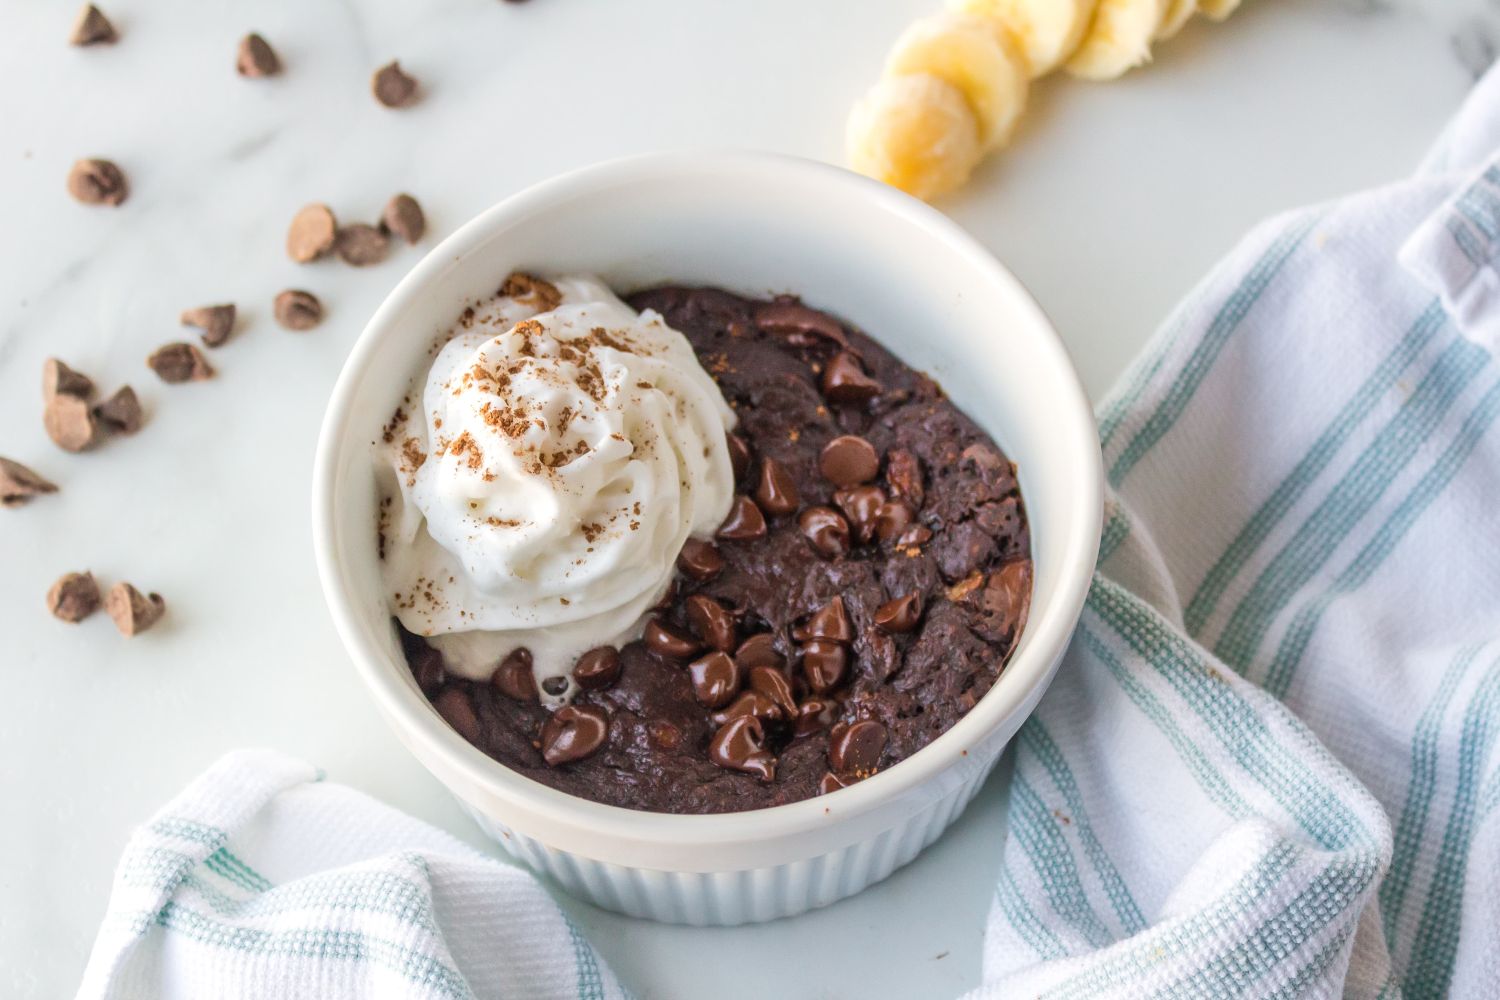 Microwave chocolate peanut butter cake with banana, chocolate chips, and whipped cream in a ramekin.